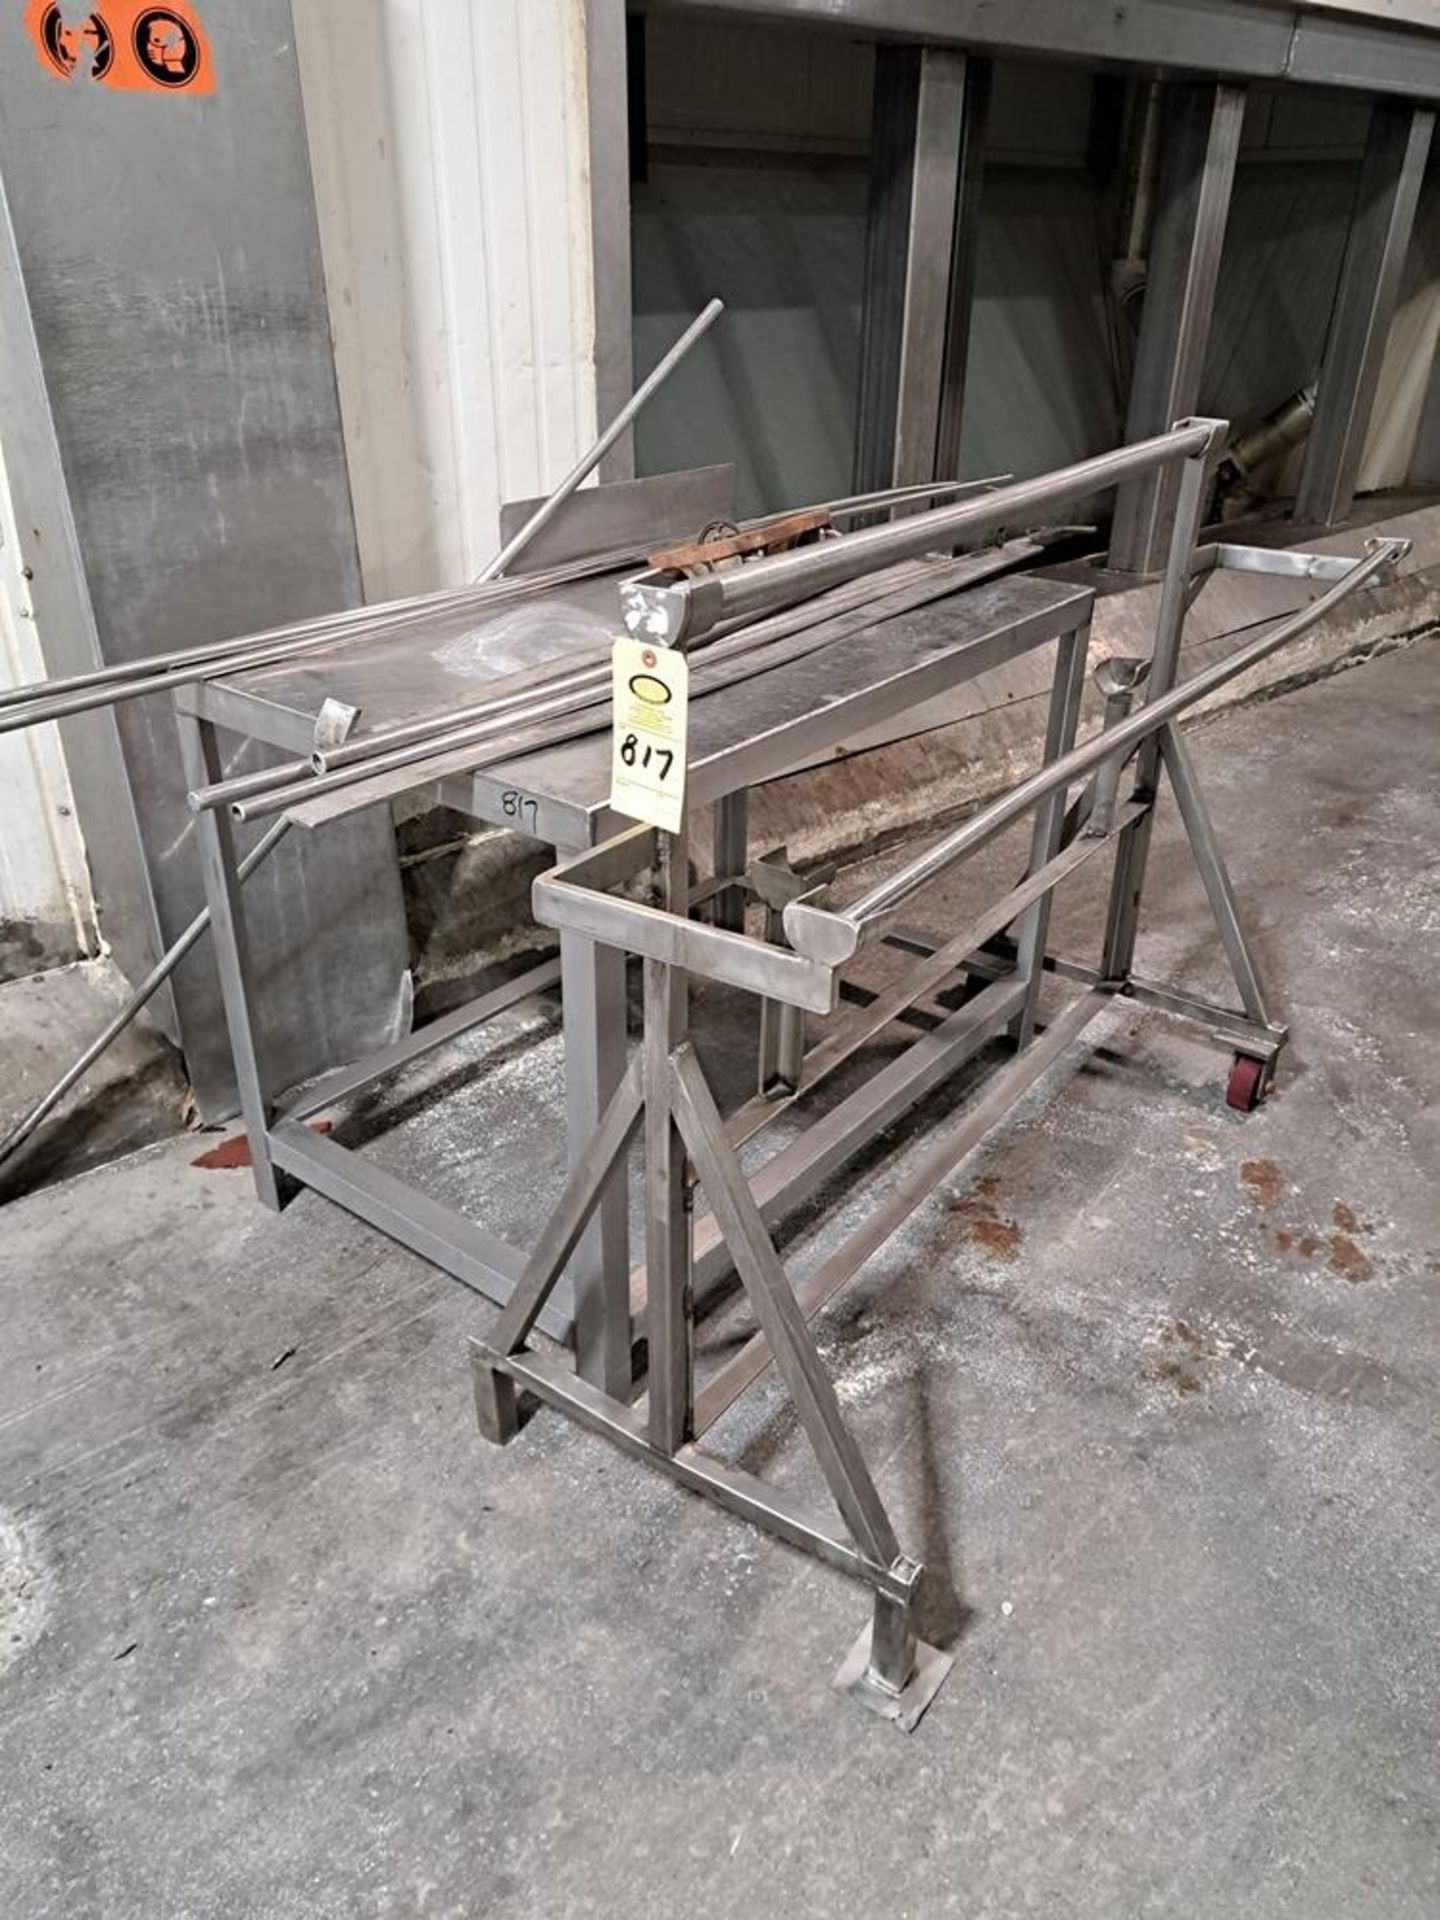 Lot Stainless Steel Meat Wash, (3) Stainless Steel Tables: Required Loading Fee $200.00, Rigger-Norm - Image 7 of 7